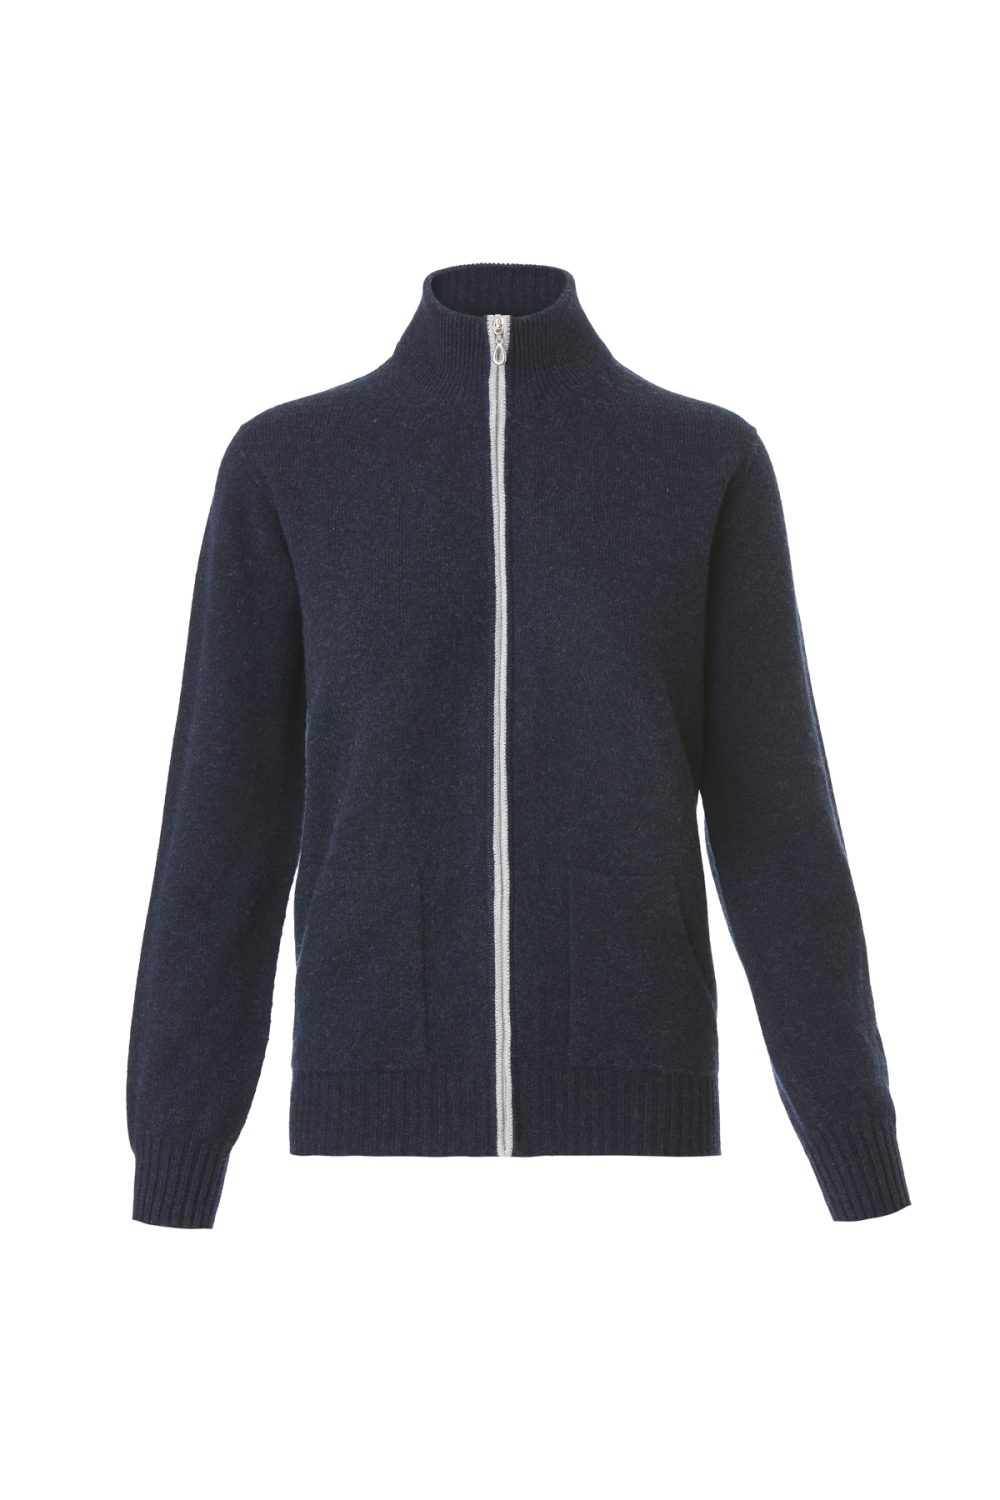 3D Cardigan with High Neck for Men, Navy - AmiAmalia Luxury Knitwear